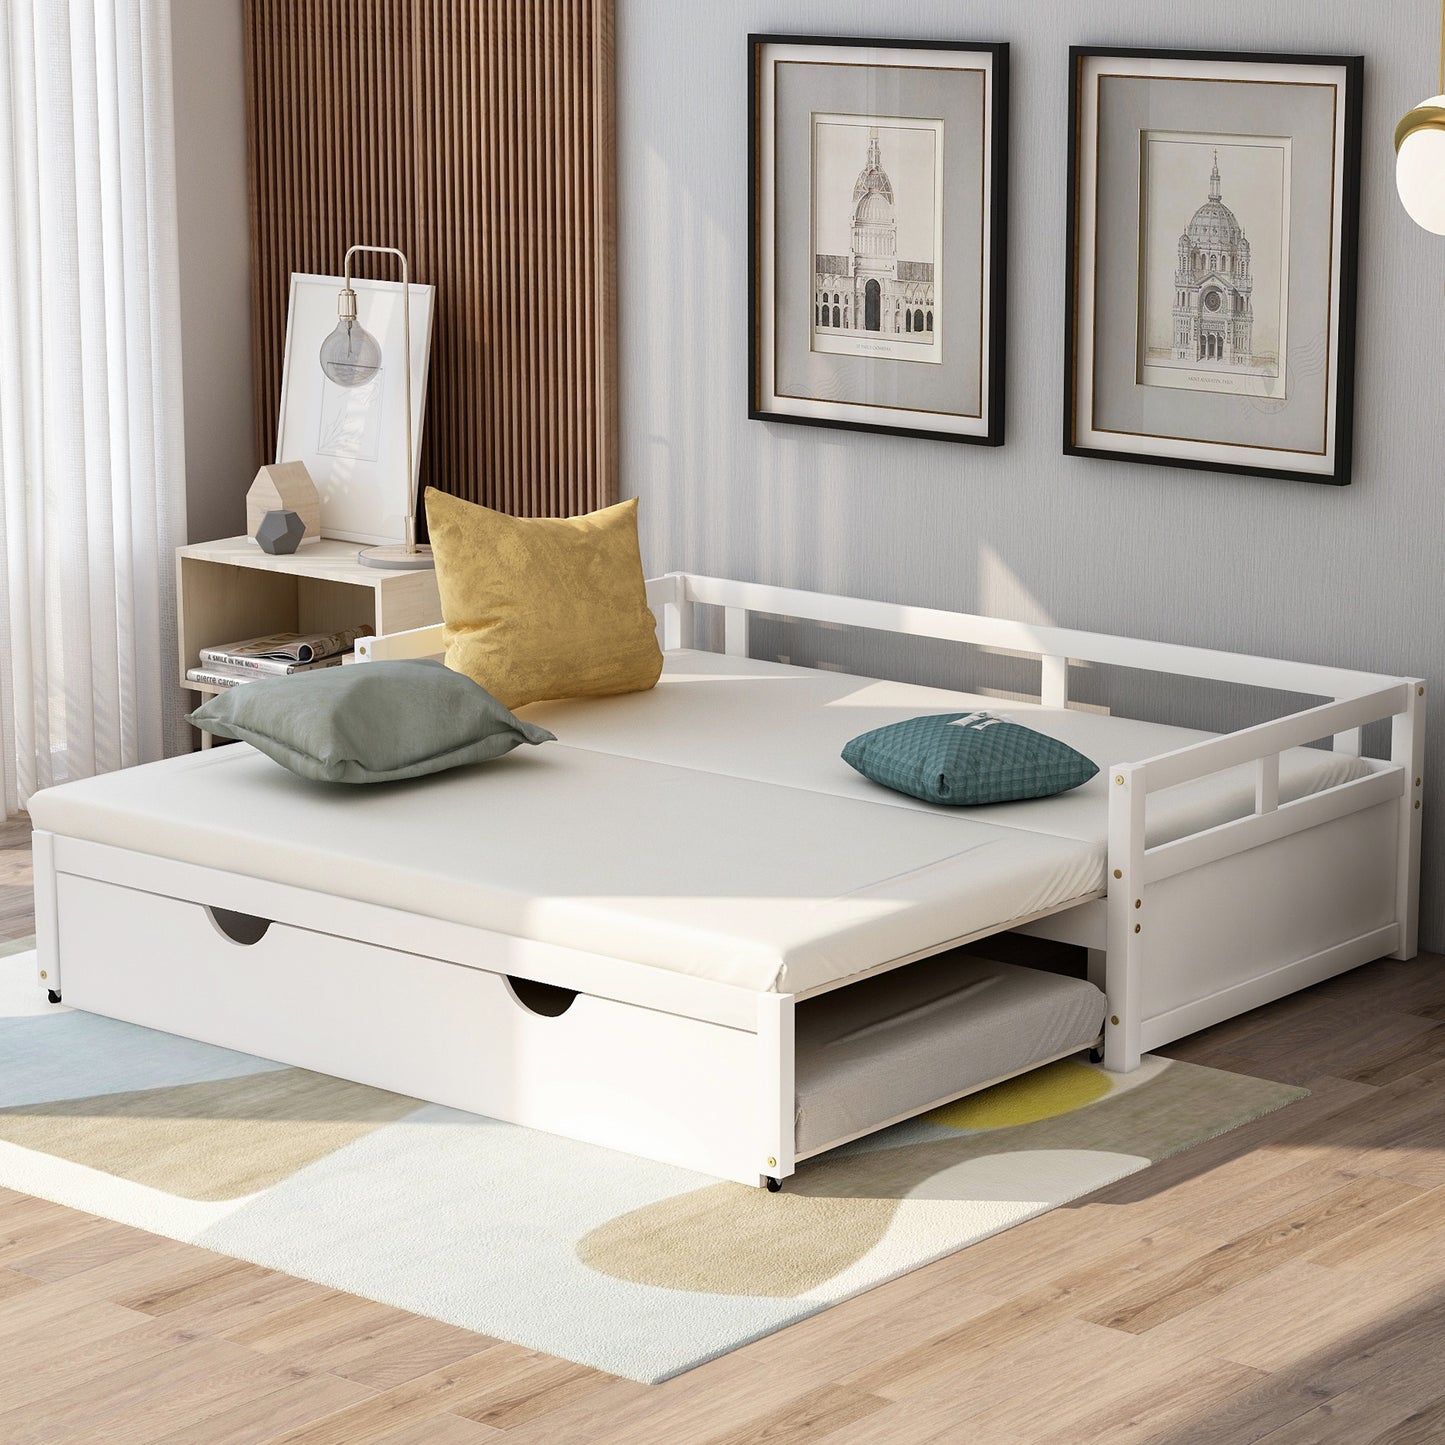 Extending Daybed with Trundle,Wooden Daybed with Trundle, White